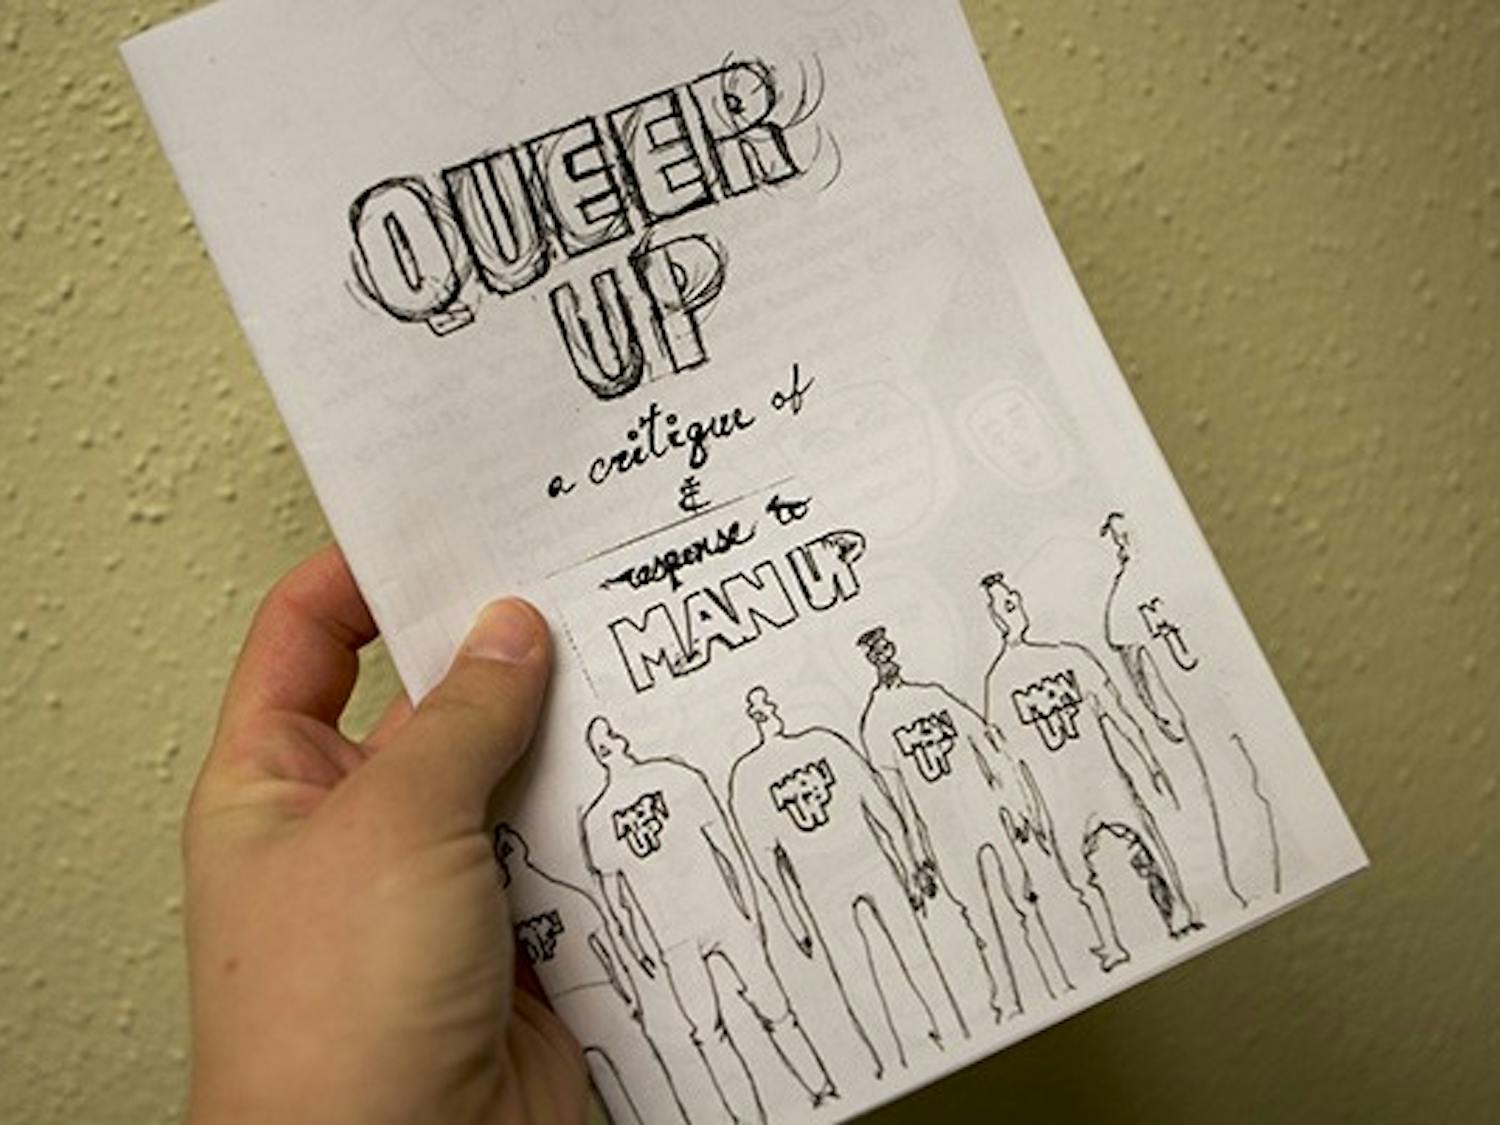 A queer visual culture class created Queer Up ASU as a response to Man Up ASU. The group is hosting an event on campus Wednesday in hopes to challenge the idea of male privilege and start dialogue about respect for women and gender non-binary people. (Photo by Diana Lustig)